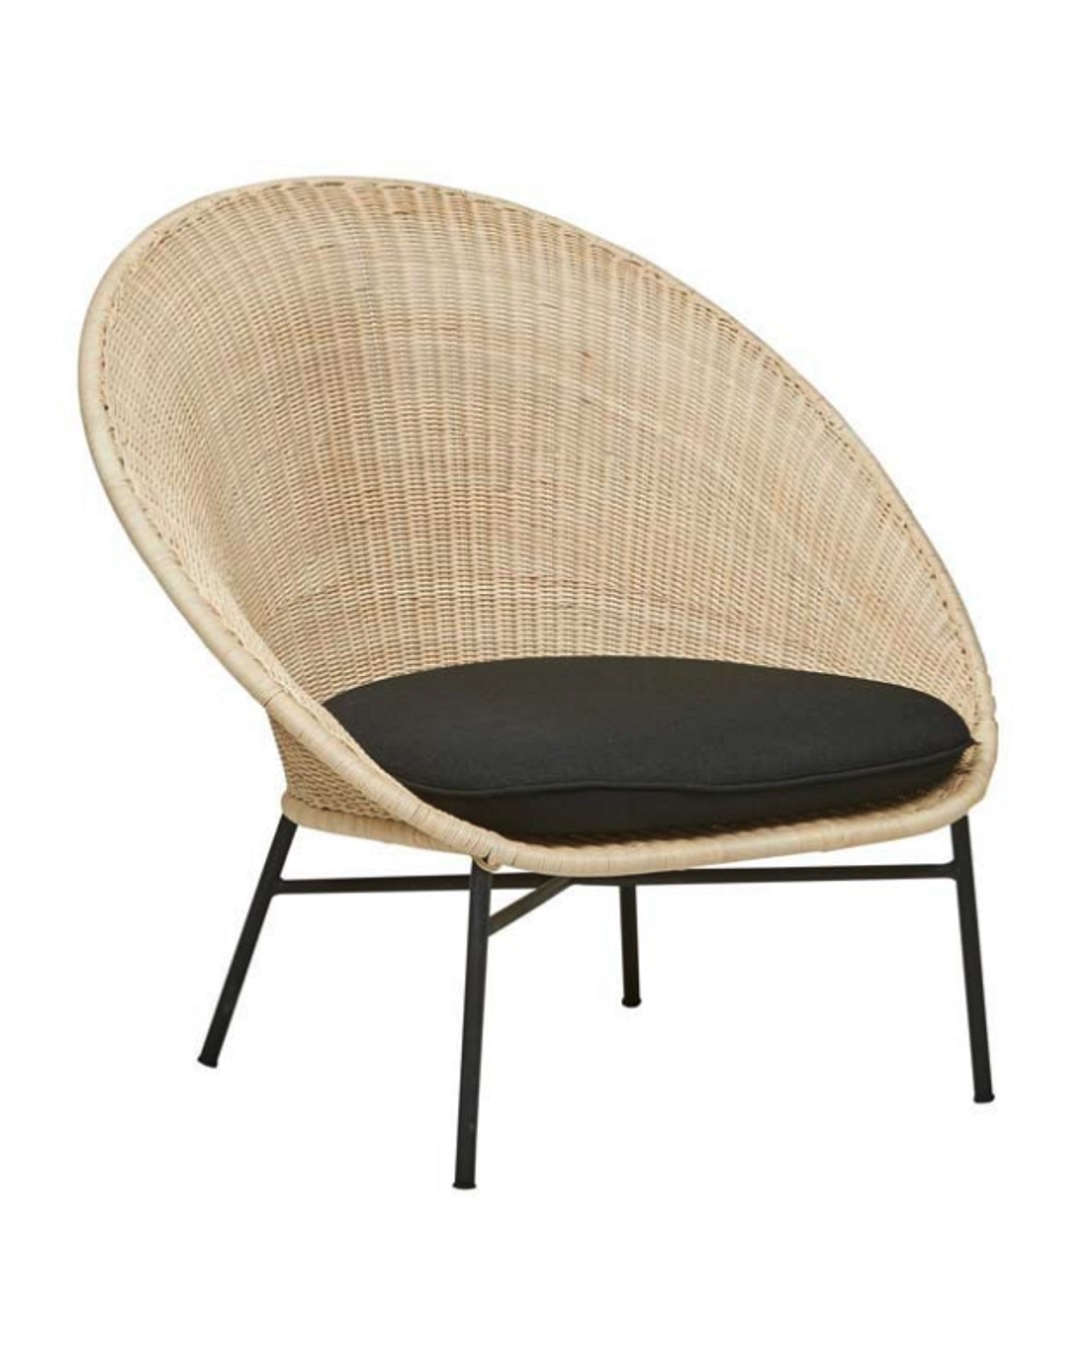 Weaver occasional chair